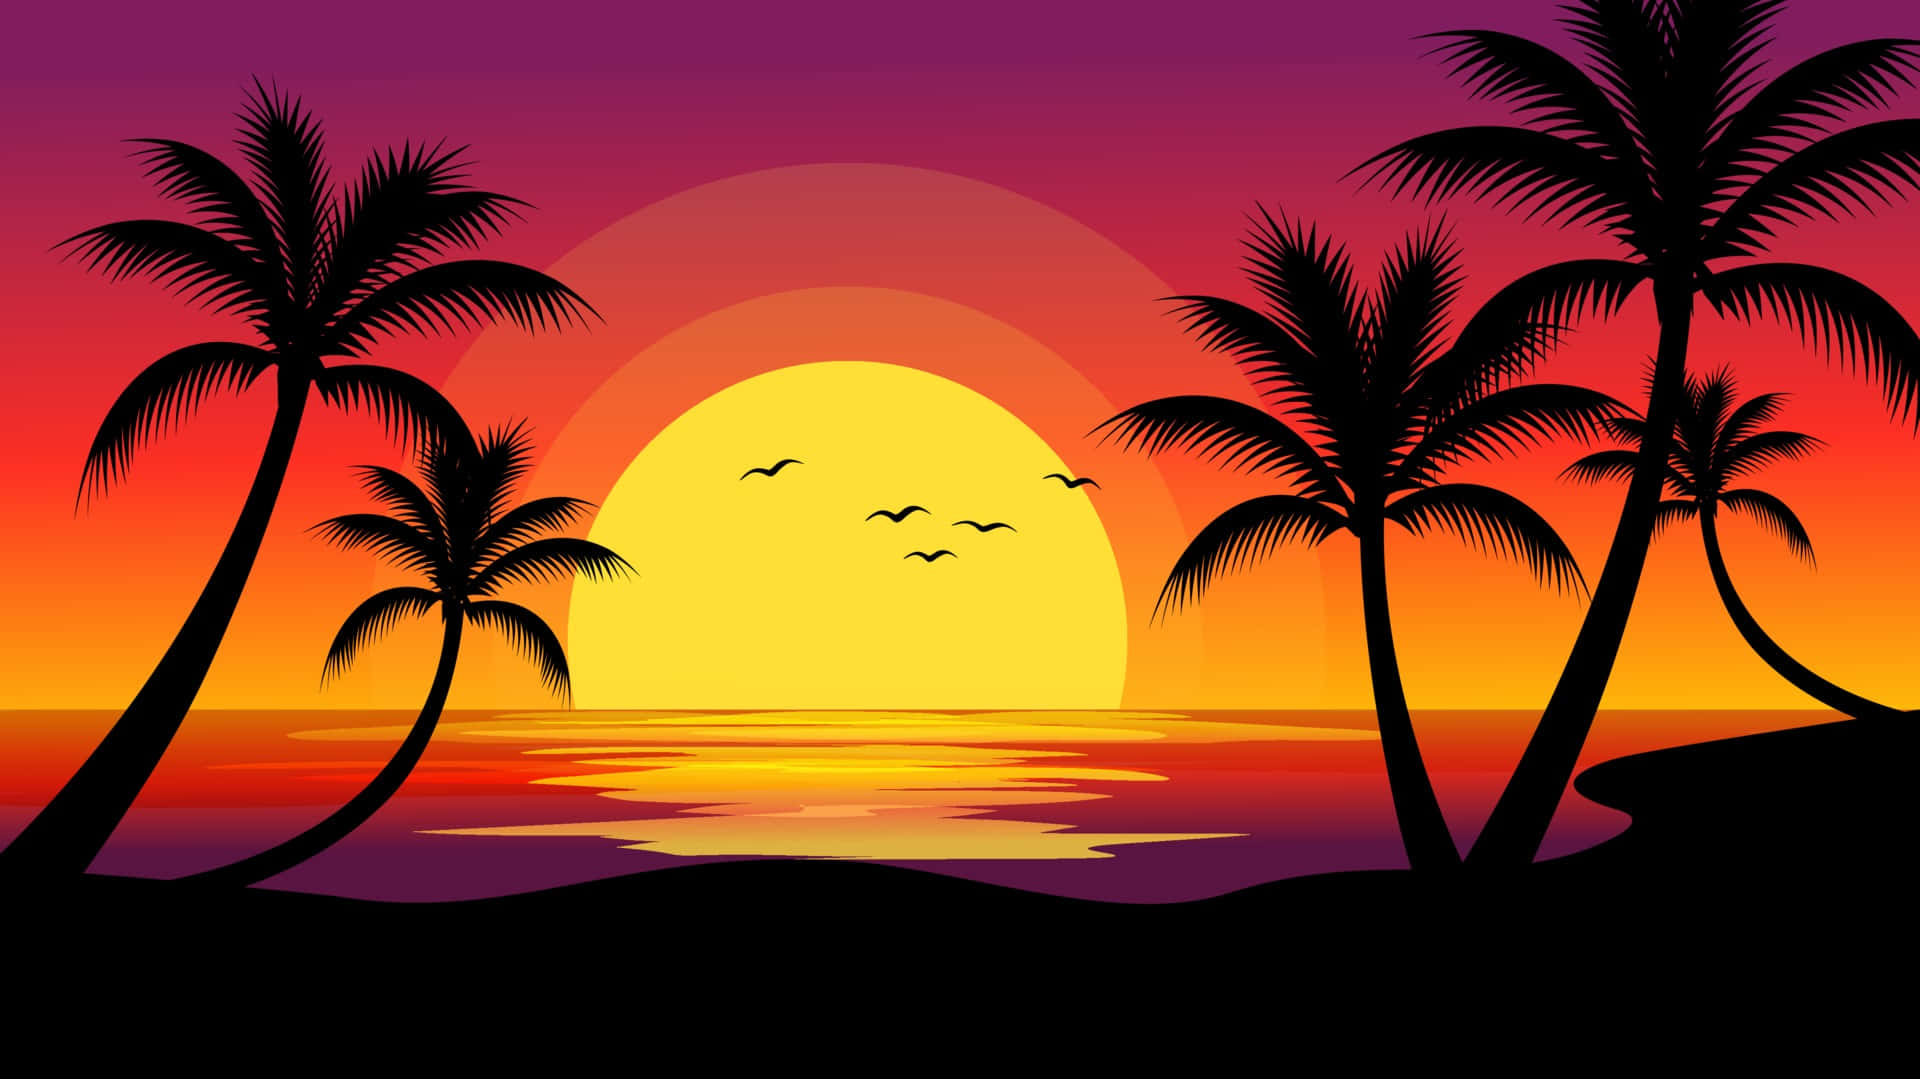 "Take in the serenity of a beautiful beach sunset"